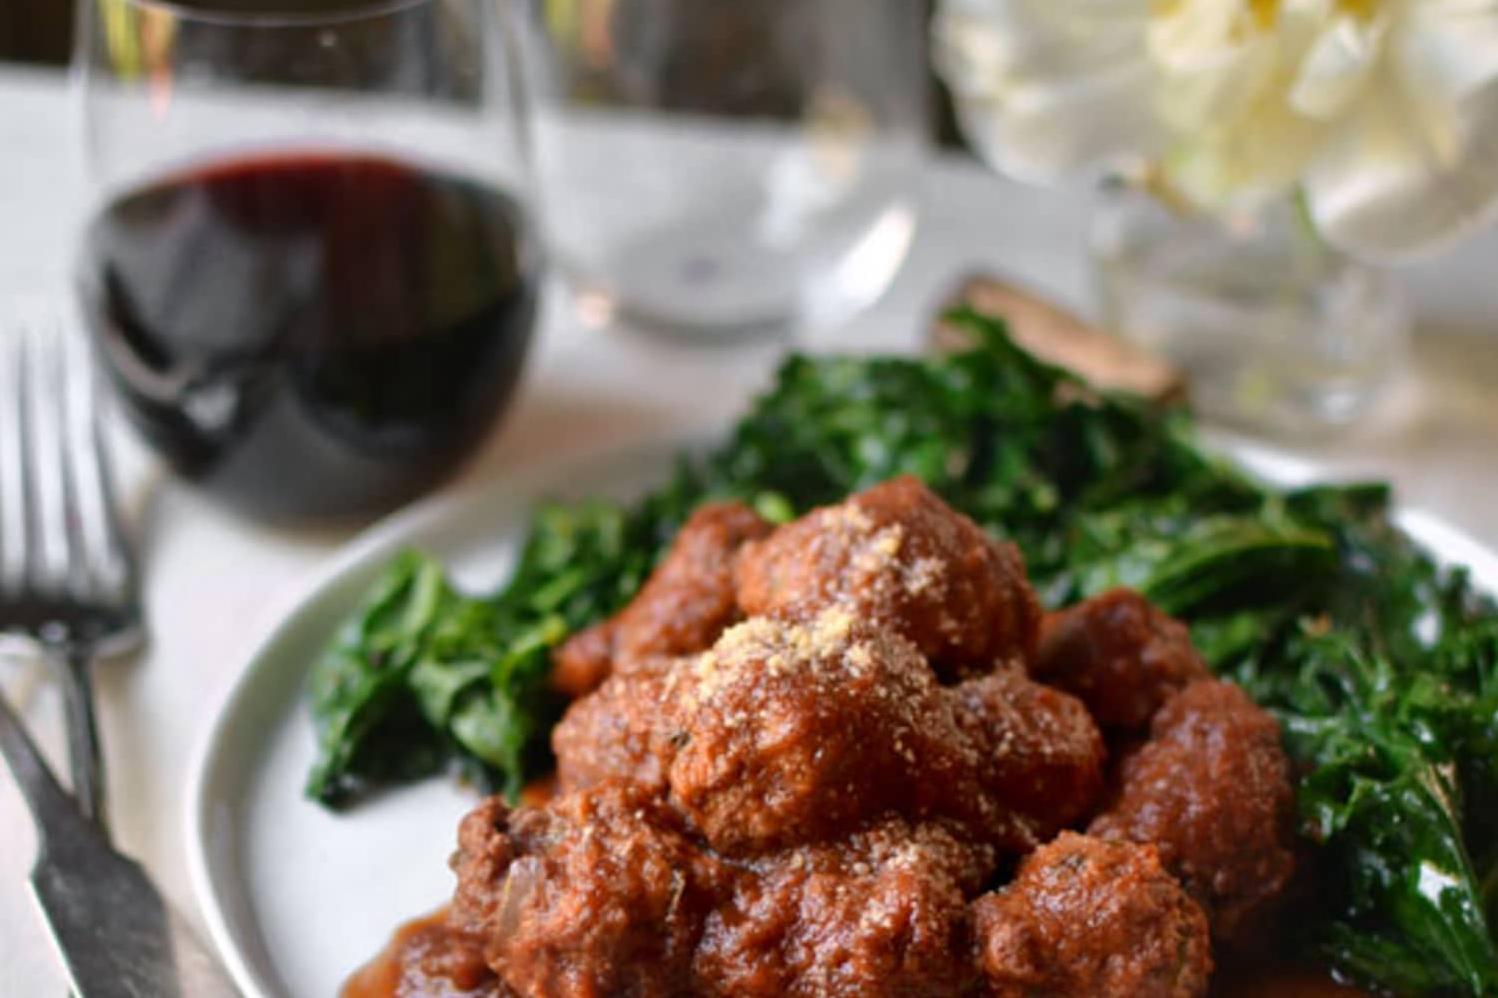  When life hands you meat, make meatballs!